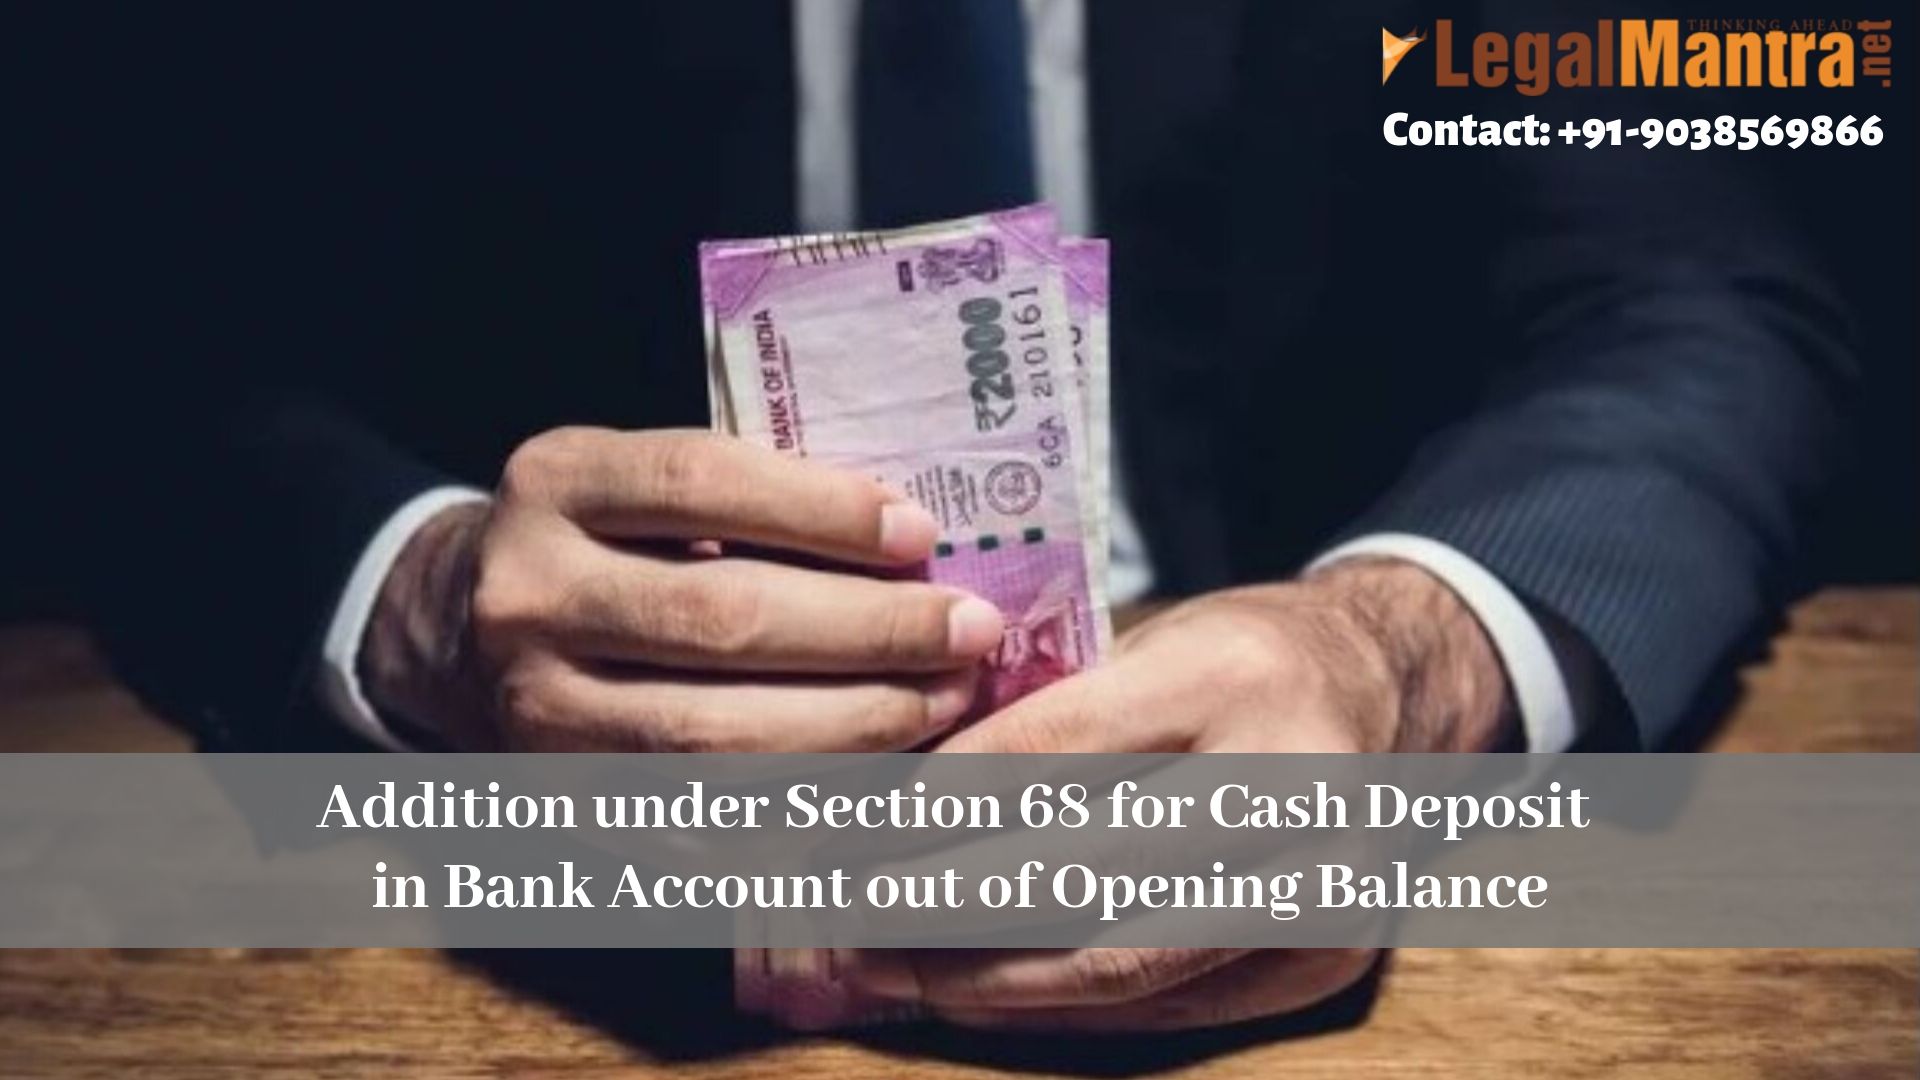 Addition under section 68 for cash deposit in bank account out of opening balance